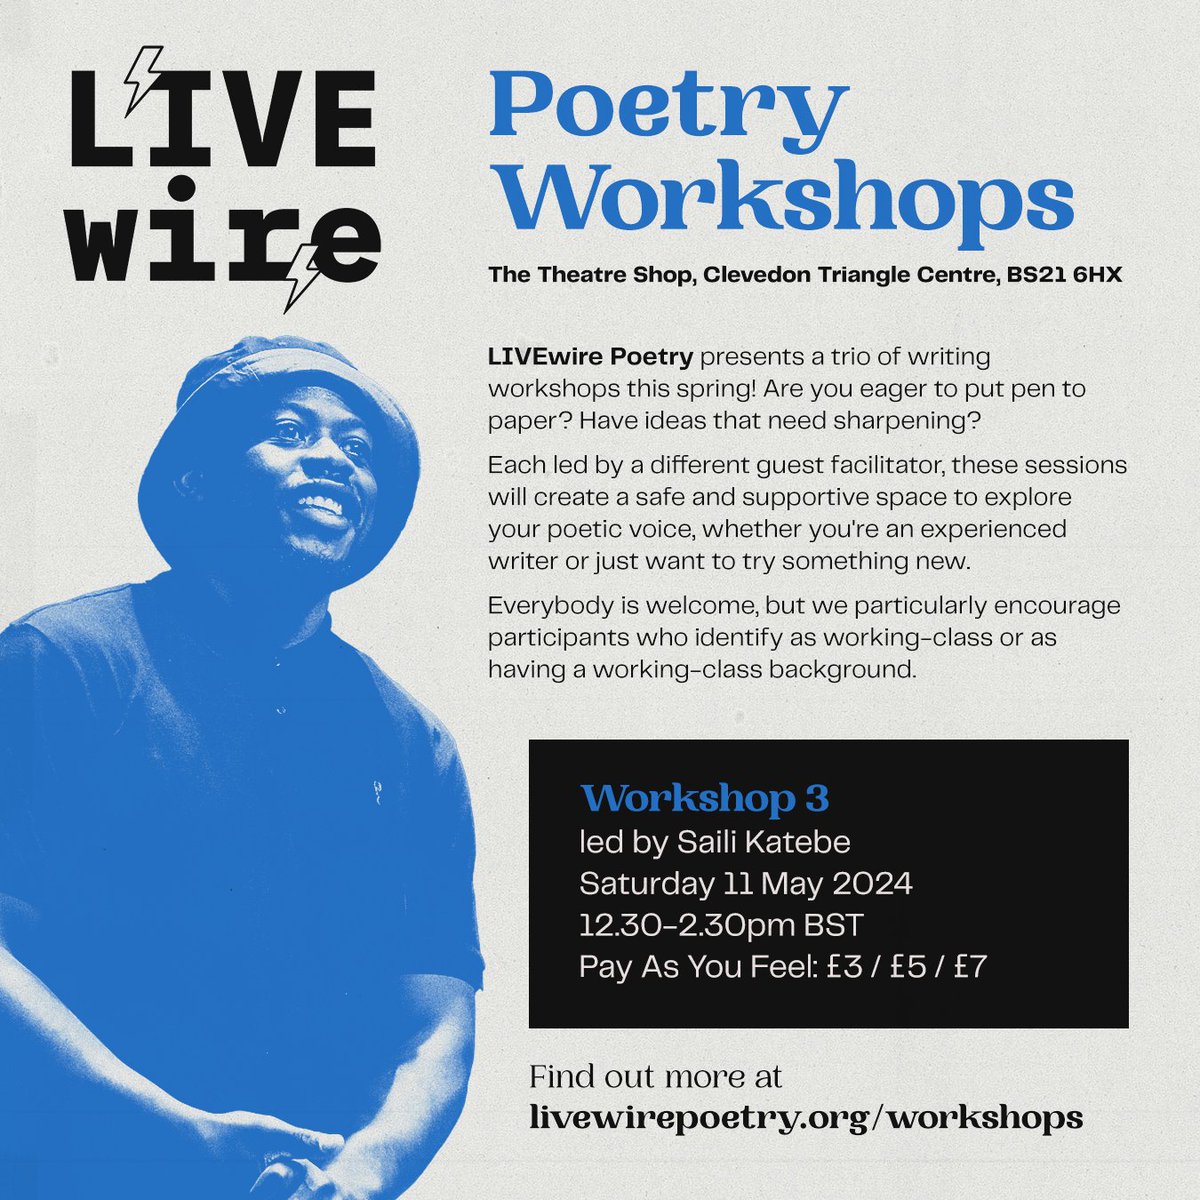 Calling all Somerset-based poets! Our final Clevedon workshop takes place this coming Saturday (12.30-2.30pm) and will be led by the wonderful @RovingRoshi ✍️ Tickets are available below from just £3, and everybody is welcome. eventbrite.com/e/895245682937